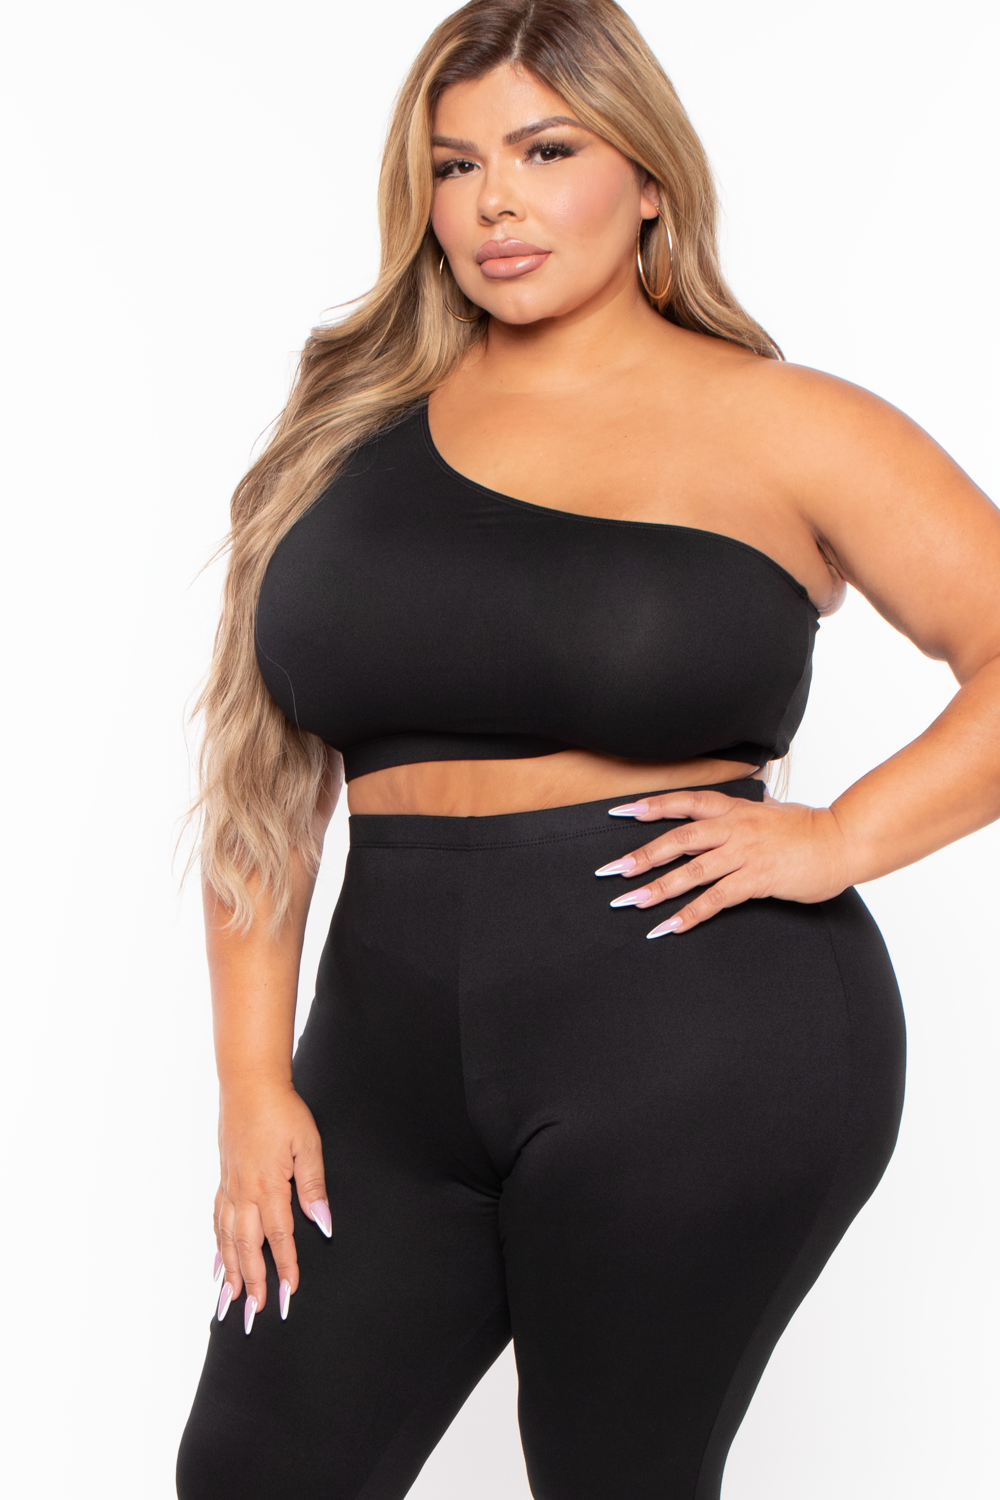 ASK SC: 6 PLACES TO SHOP FOR PLUS SIZE CROP TOPS - Stylish Curves